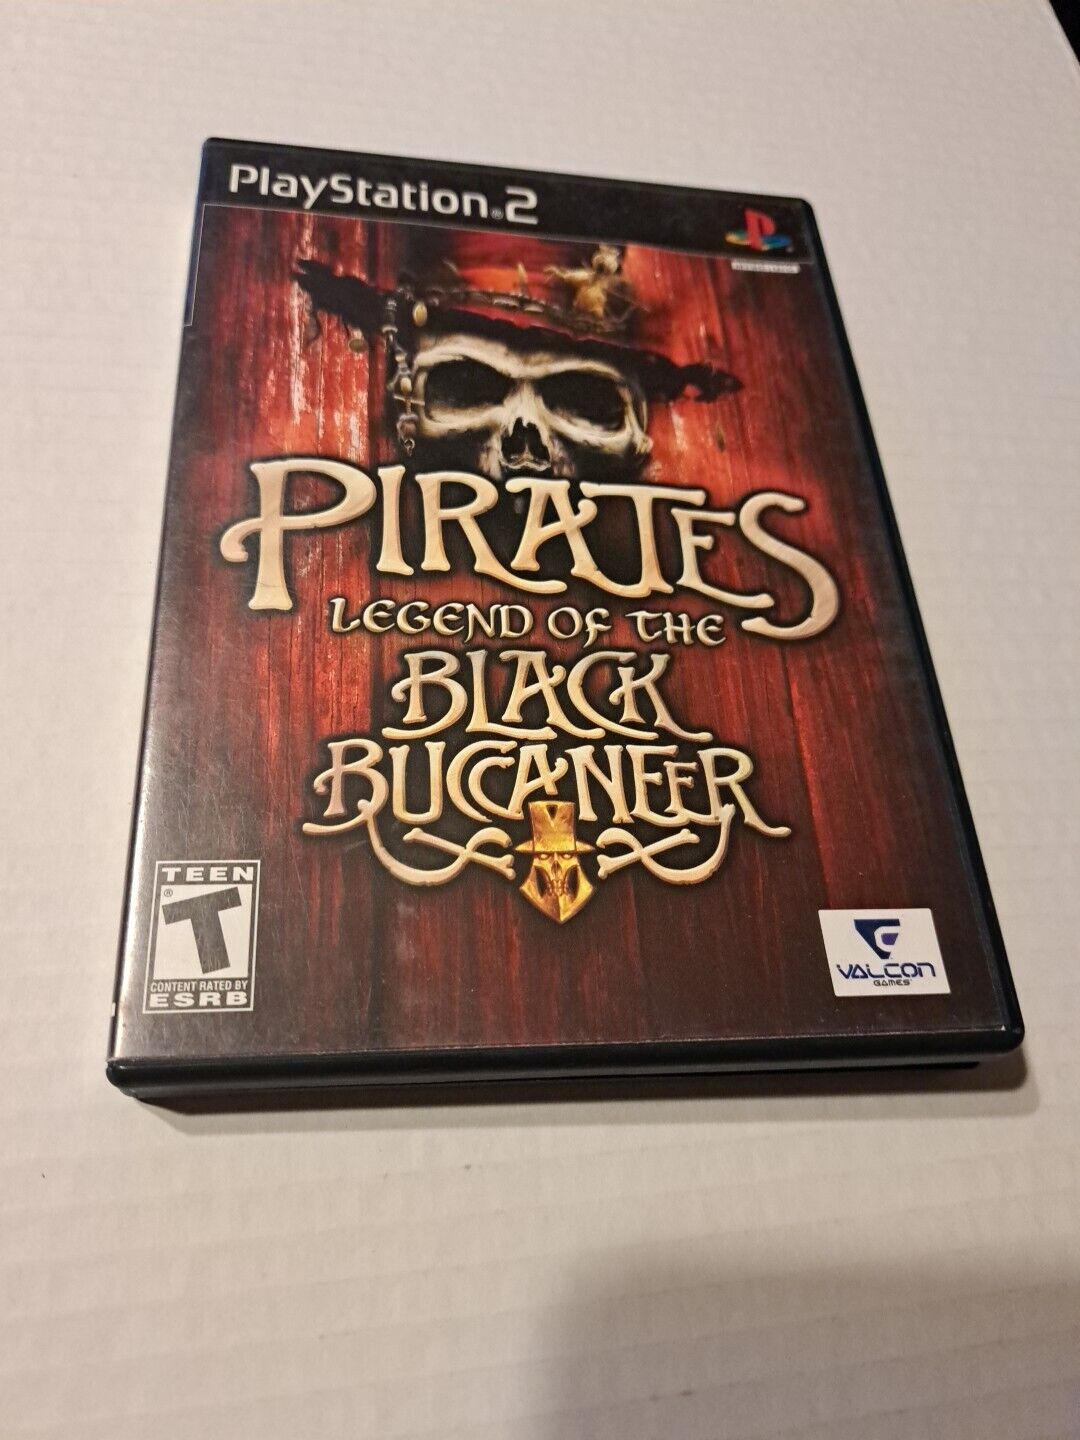 Pirates: Legend of the Black Buccaneer (Sony PlayStation 2, 2006)